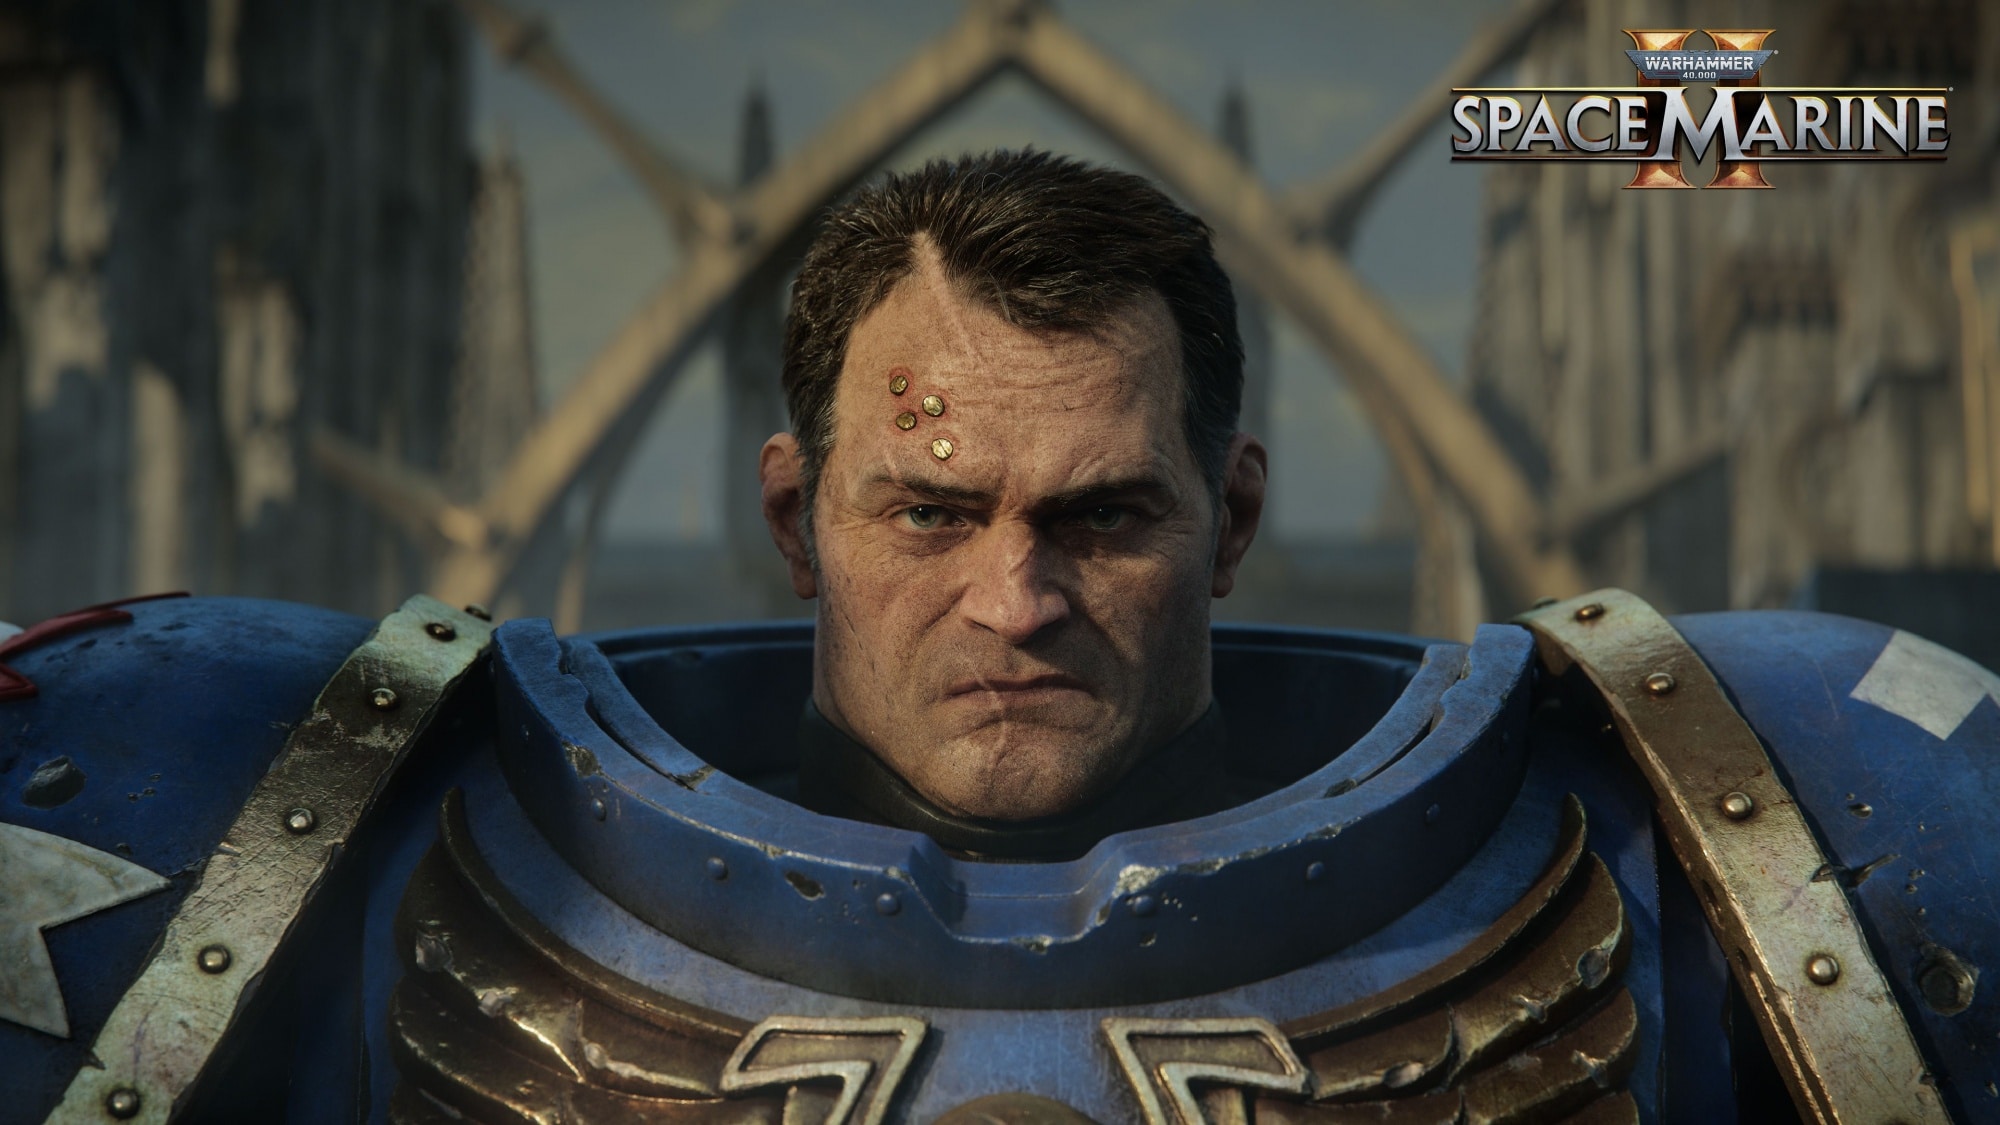 WH40K Space Marine 2: New trailer with Titus actor Clive Standen - News